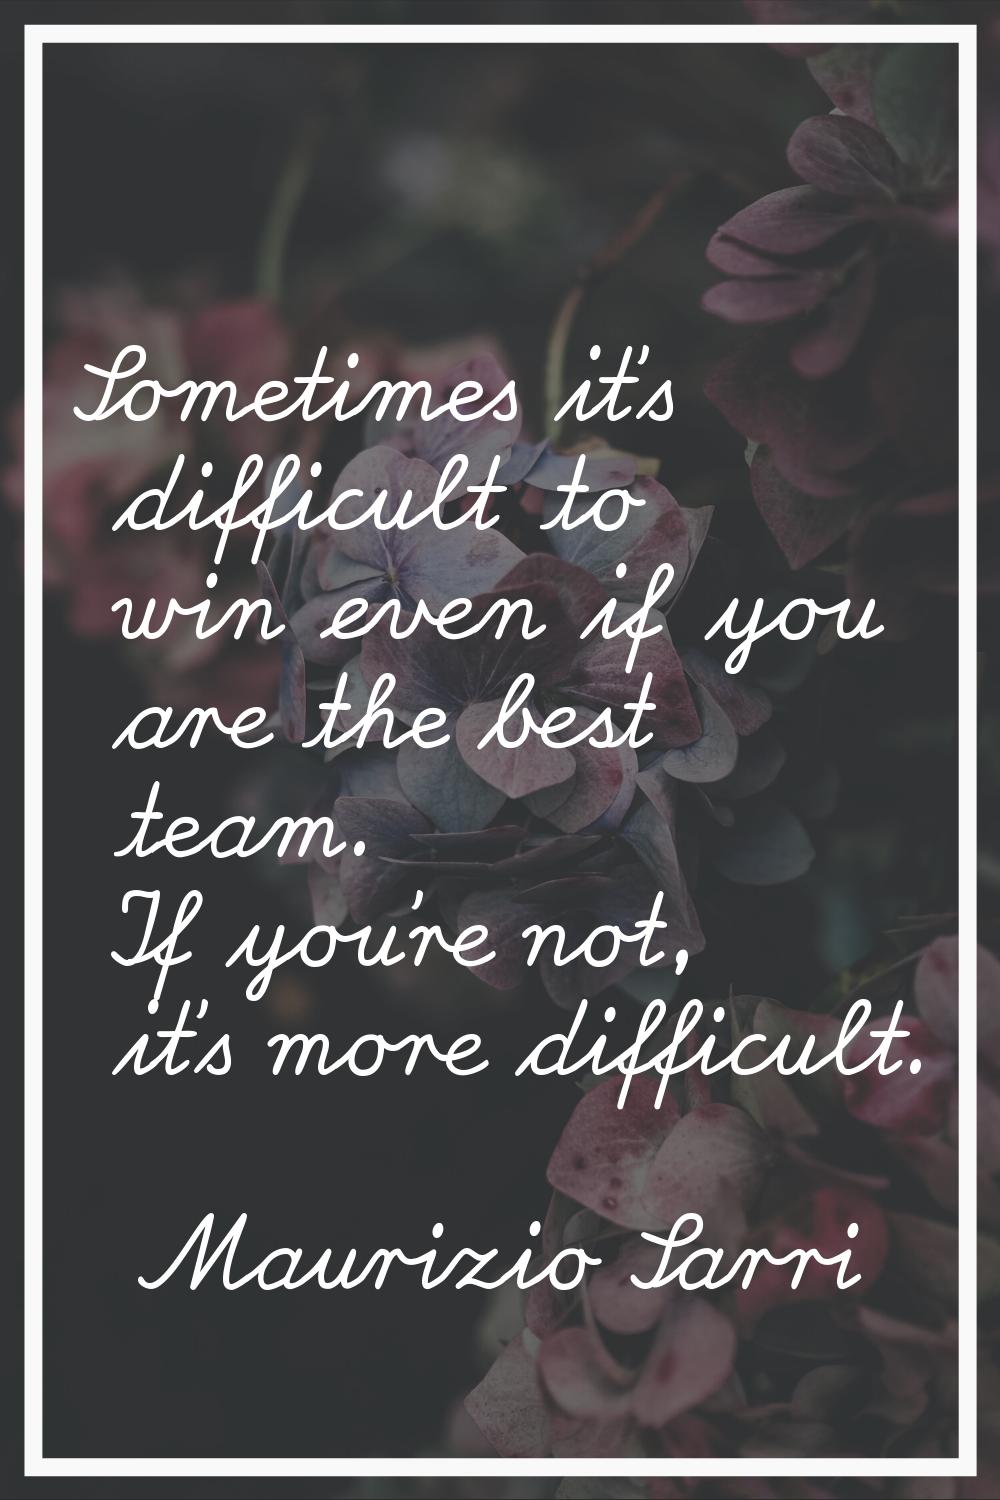 Sometimes it's difficult to win even if you are the best team. If you're not, it's more difficult.